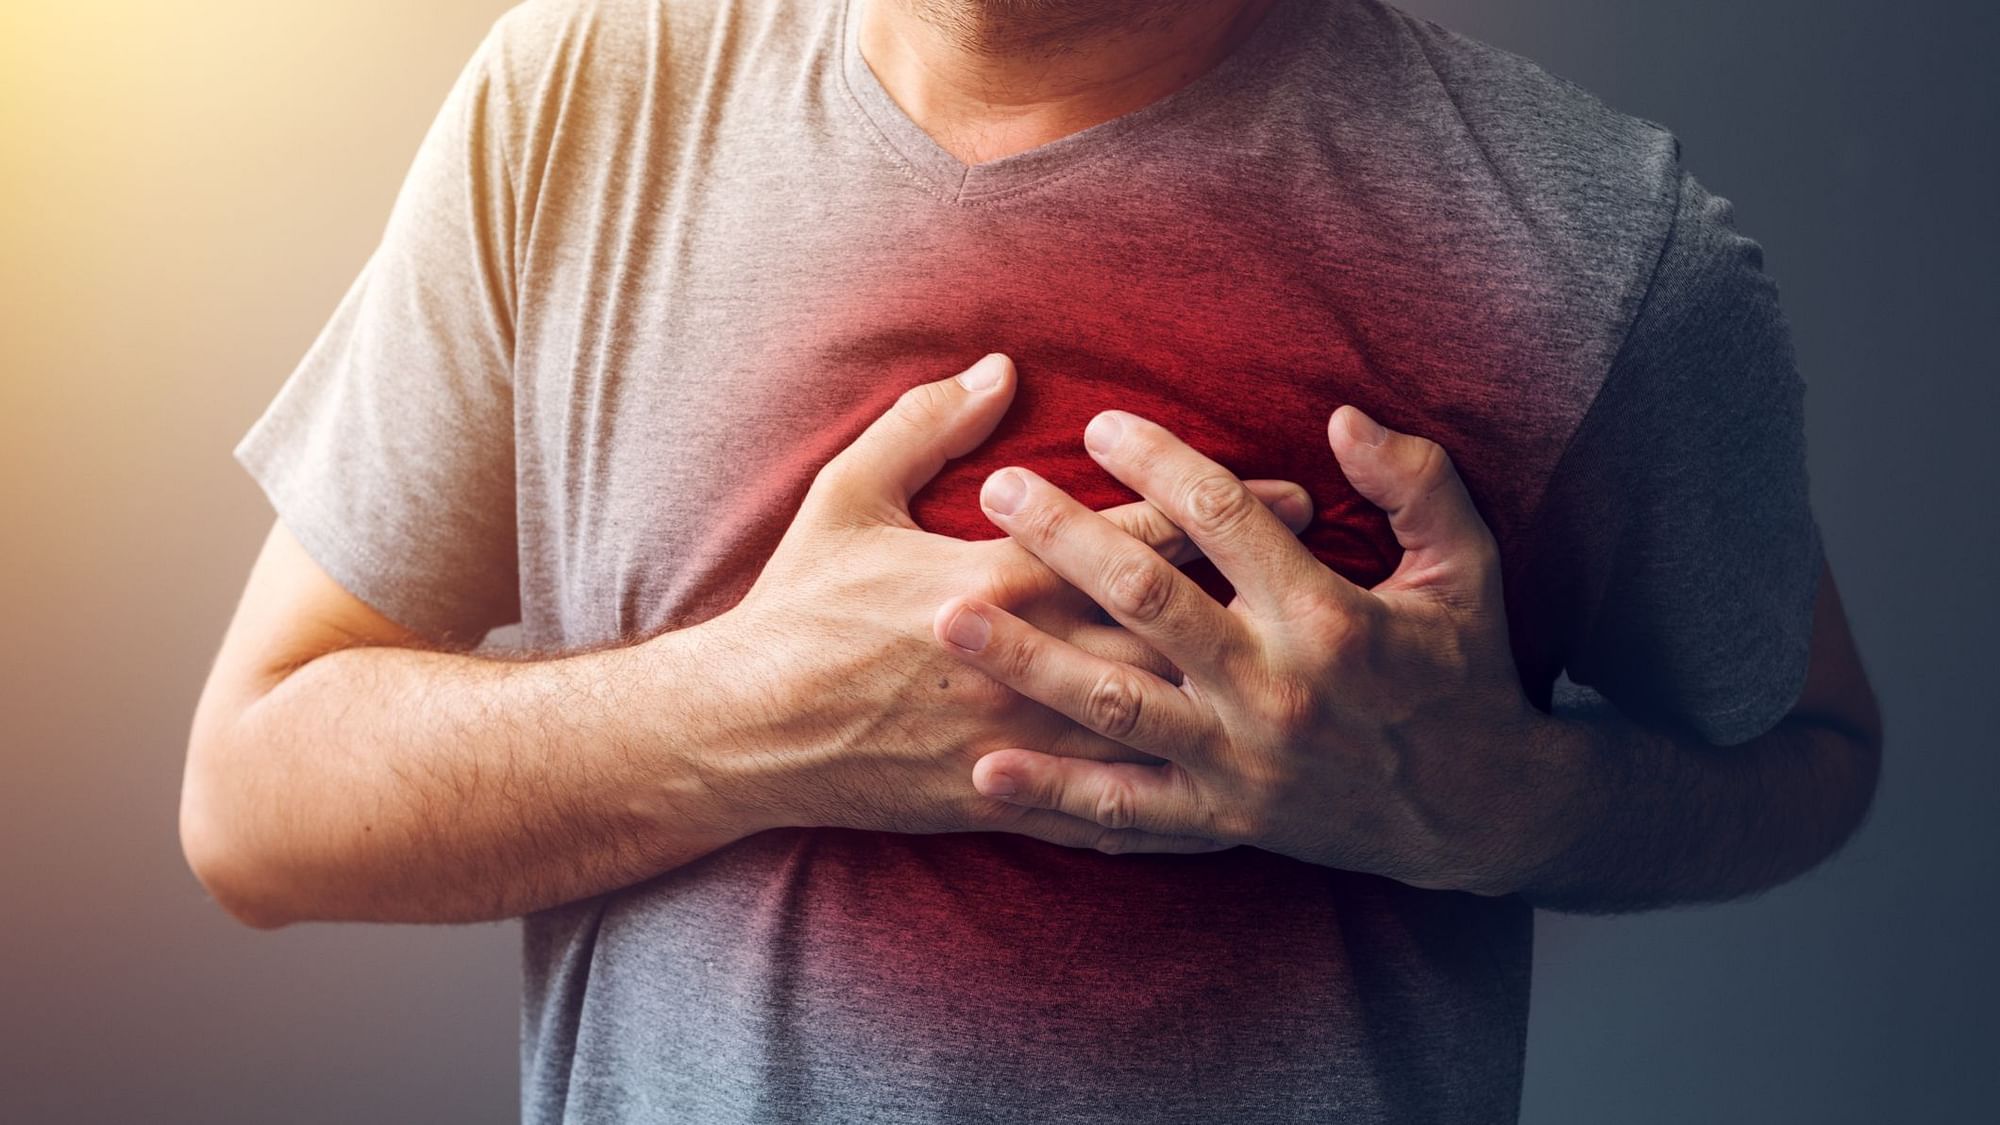 Heart Failure (HF) is a progressive disease, in which the heart muscle weakens or becomes stiff overtime, which reduces its ability to pump properly. 